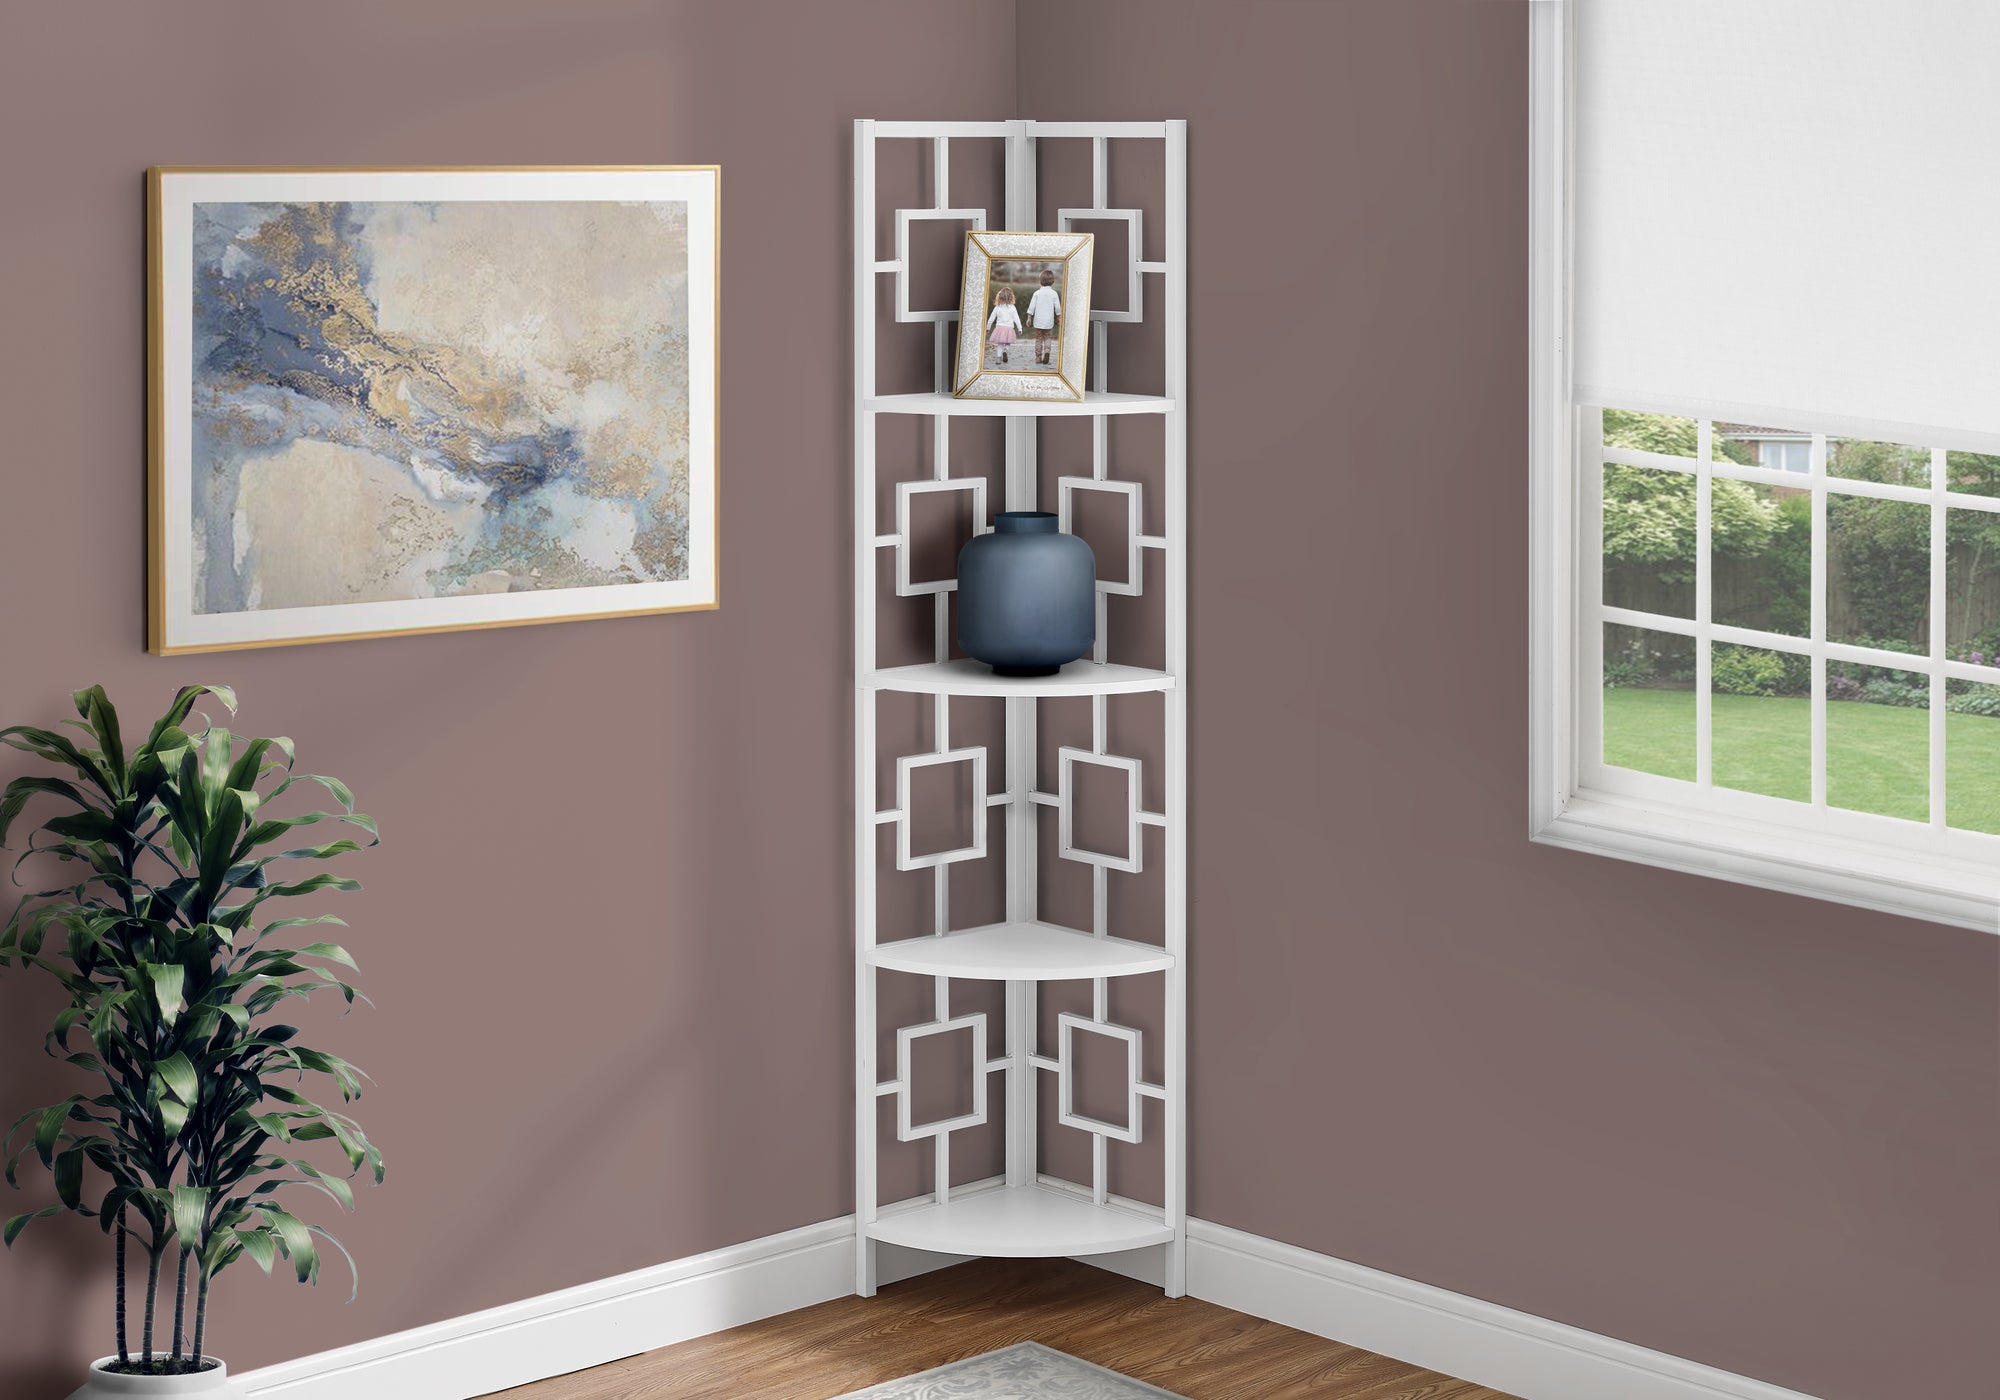 I 3613 - BOOKCASE - 62"H / WHITE / WHITE METAL CORNER ETAGERE BY MONARCH SPECIALTIES INC